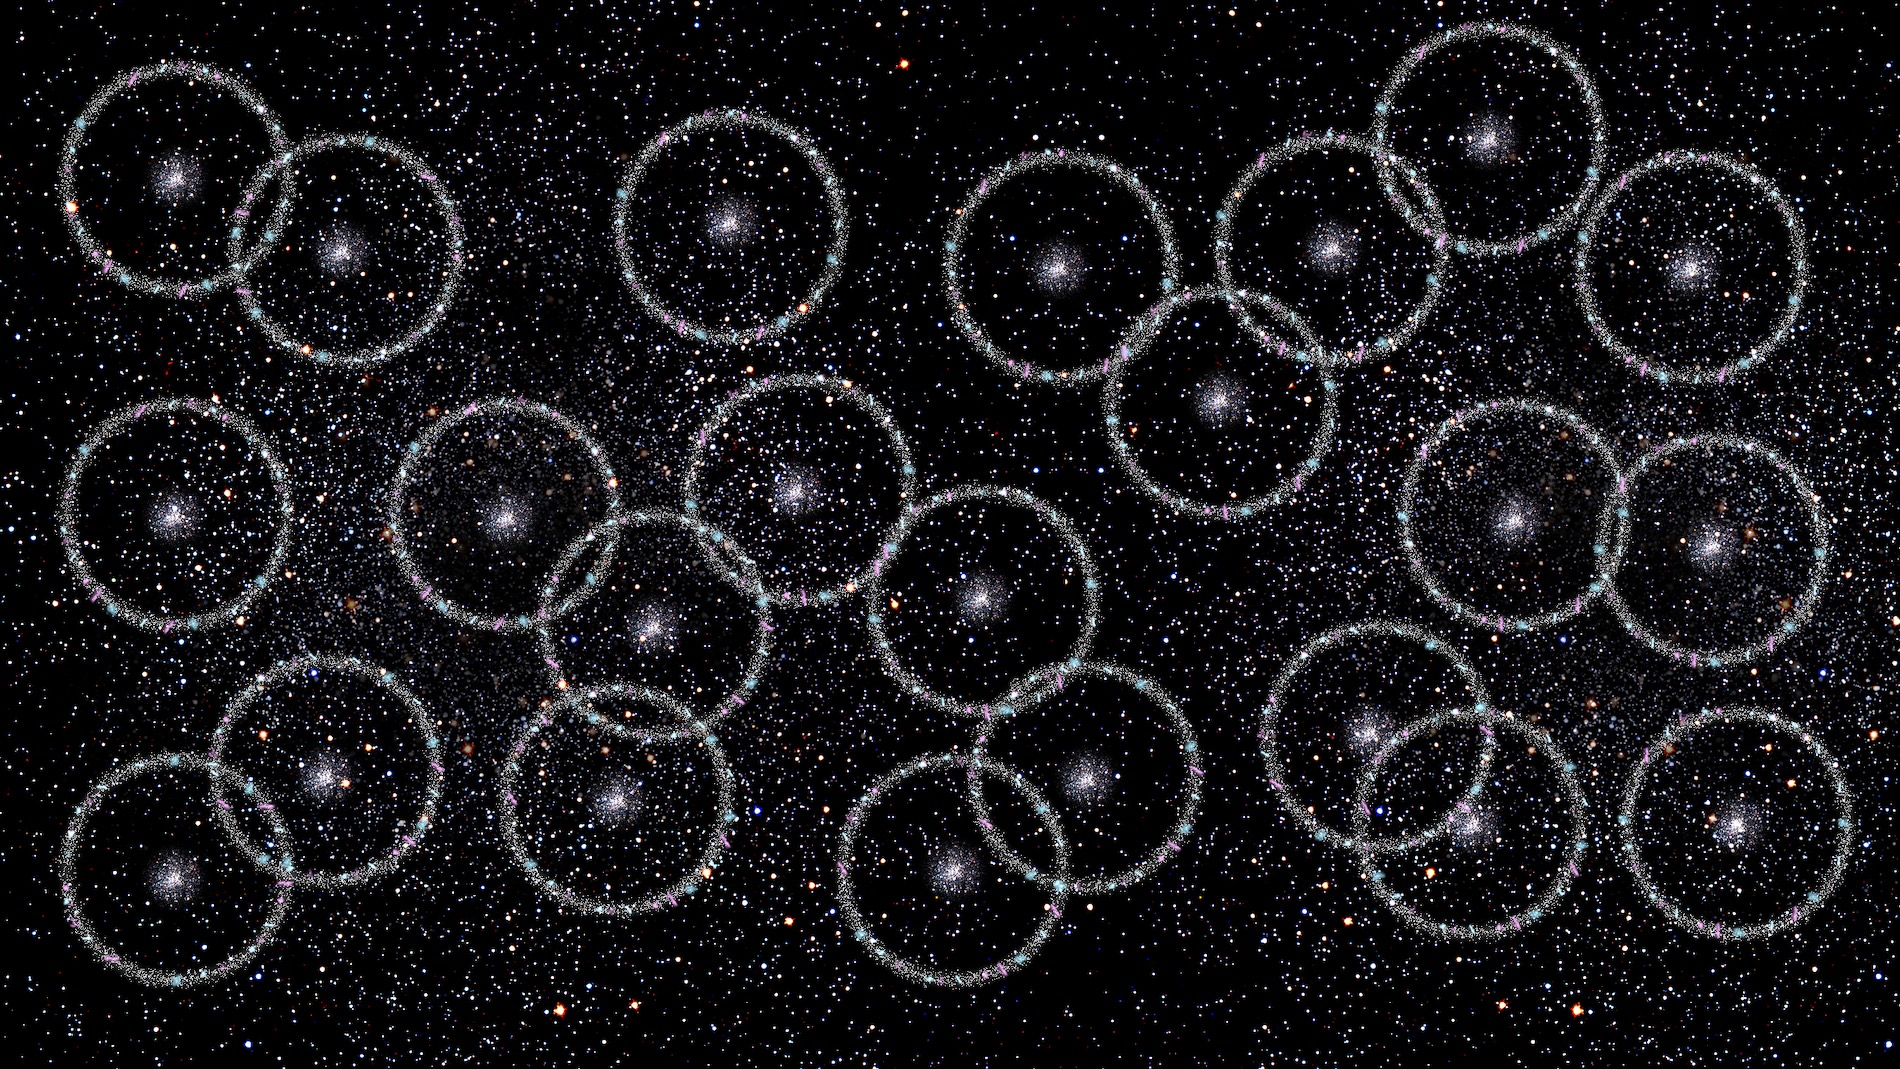 The baryon acoustic oscillation is a large-scale pattern of mass. You’re slightly more likely to find galaxies on the circles and rings rather than elsewhere. This artist’s conception simplifies and exaggerates the subtle pattern.